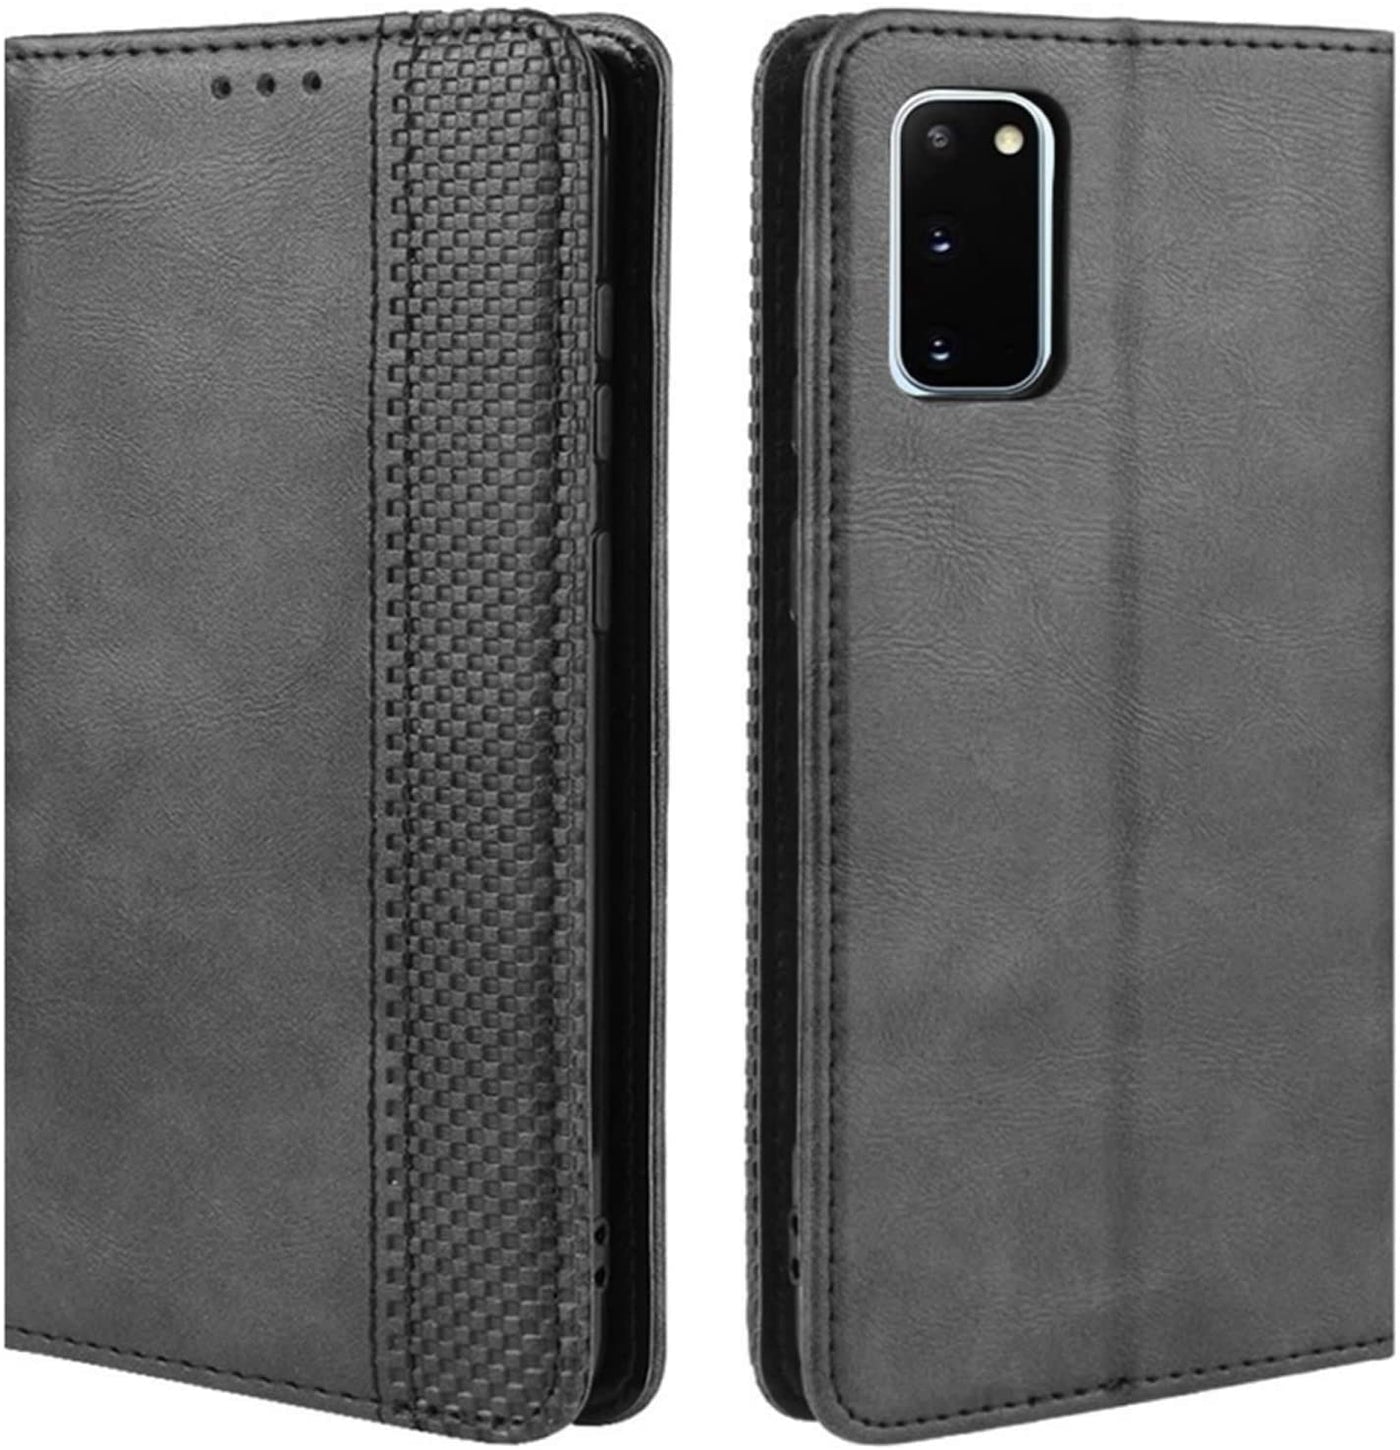 Samsung Galaxy S20 5G black color leather wallet flip cover case By excelsior